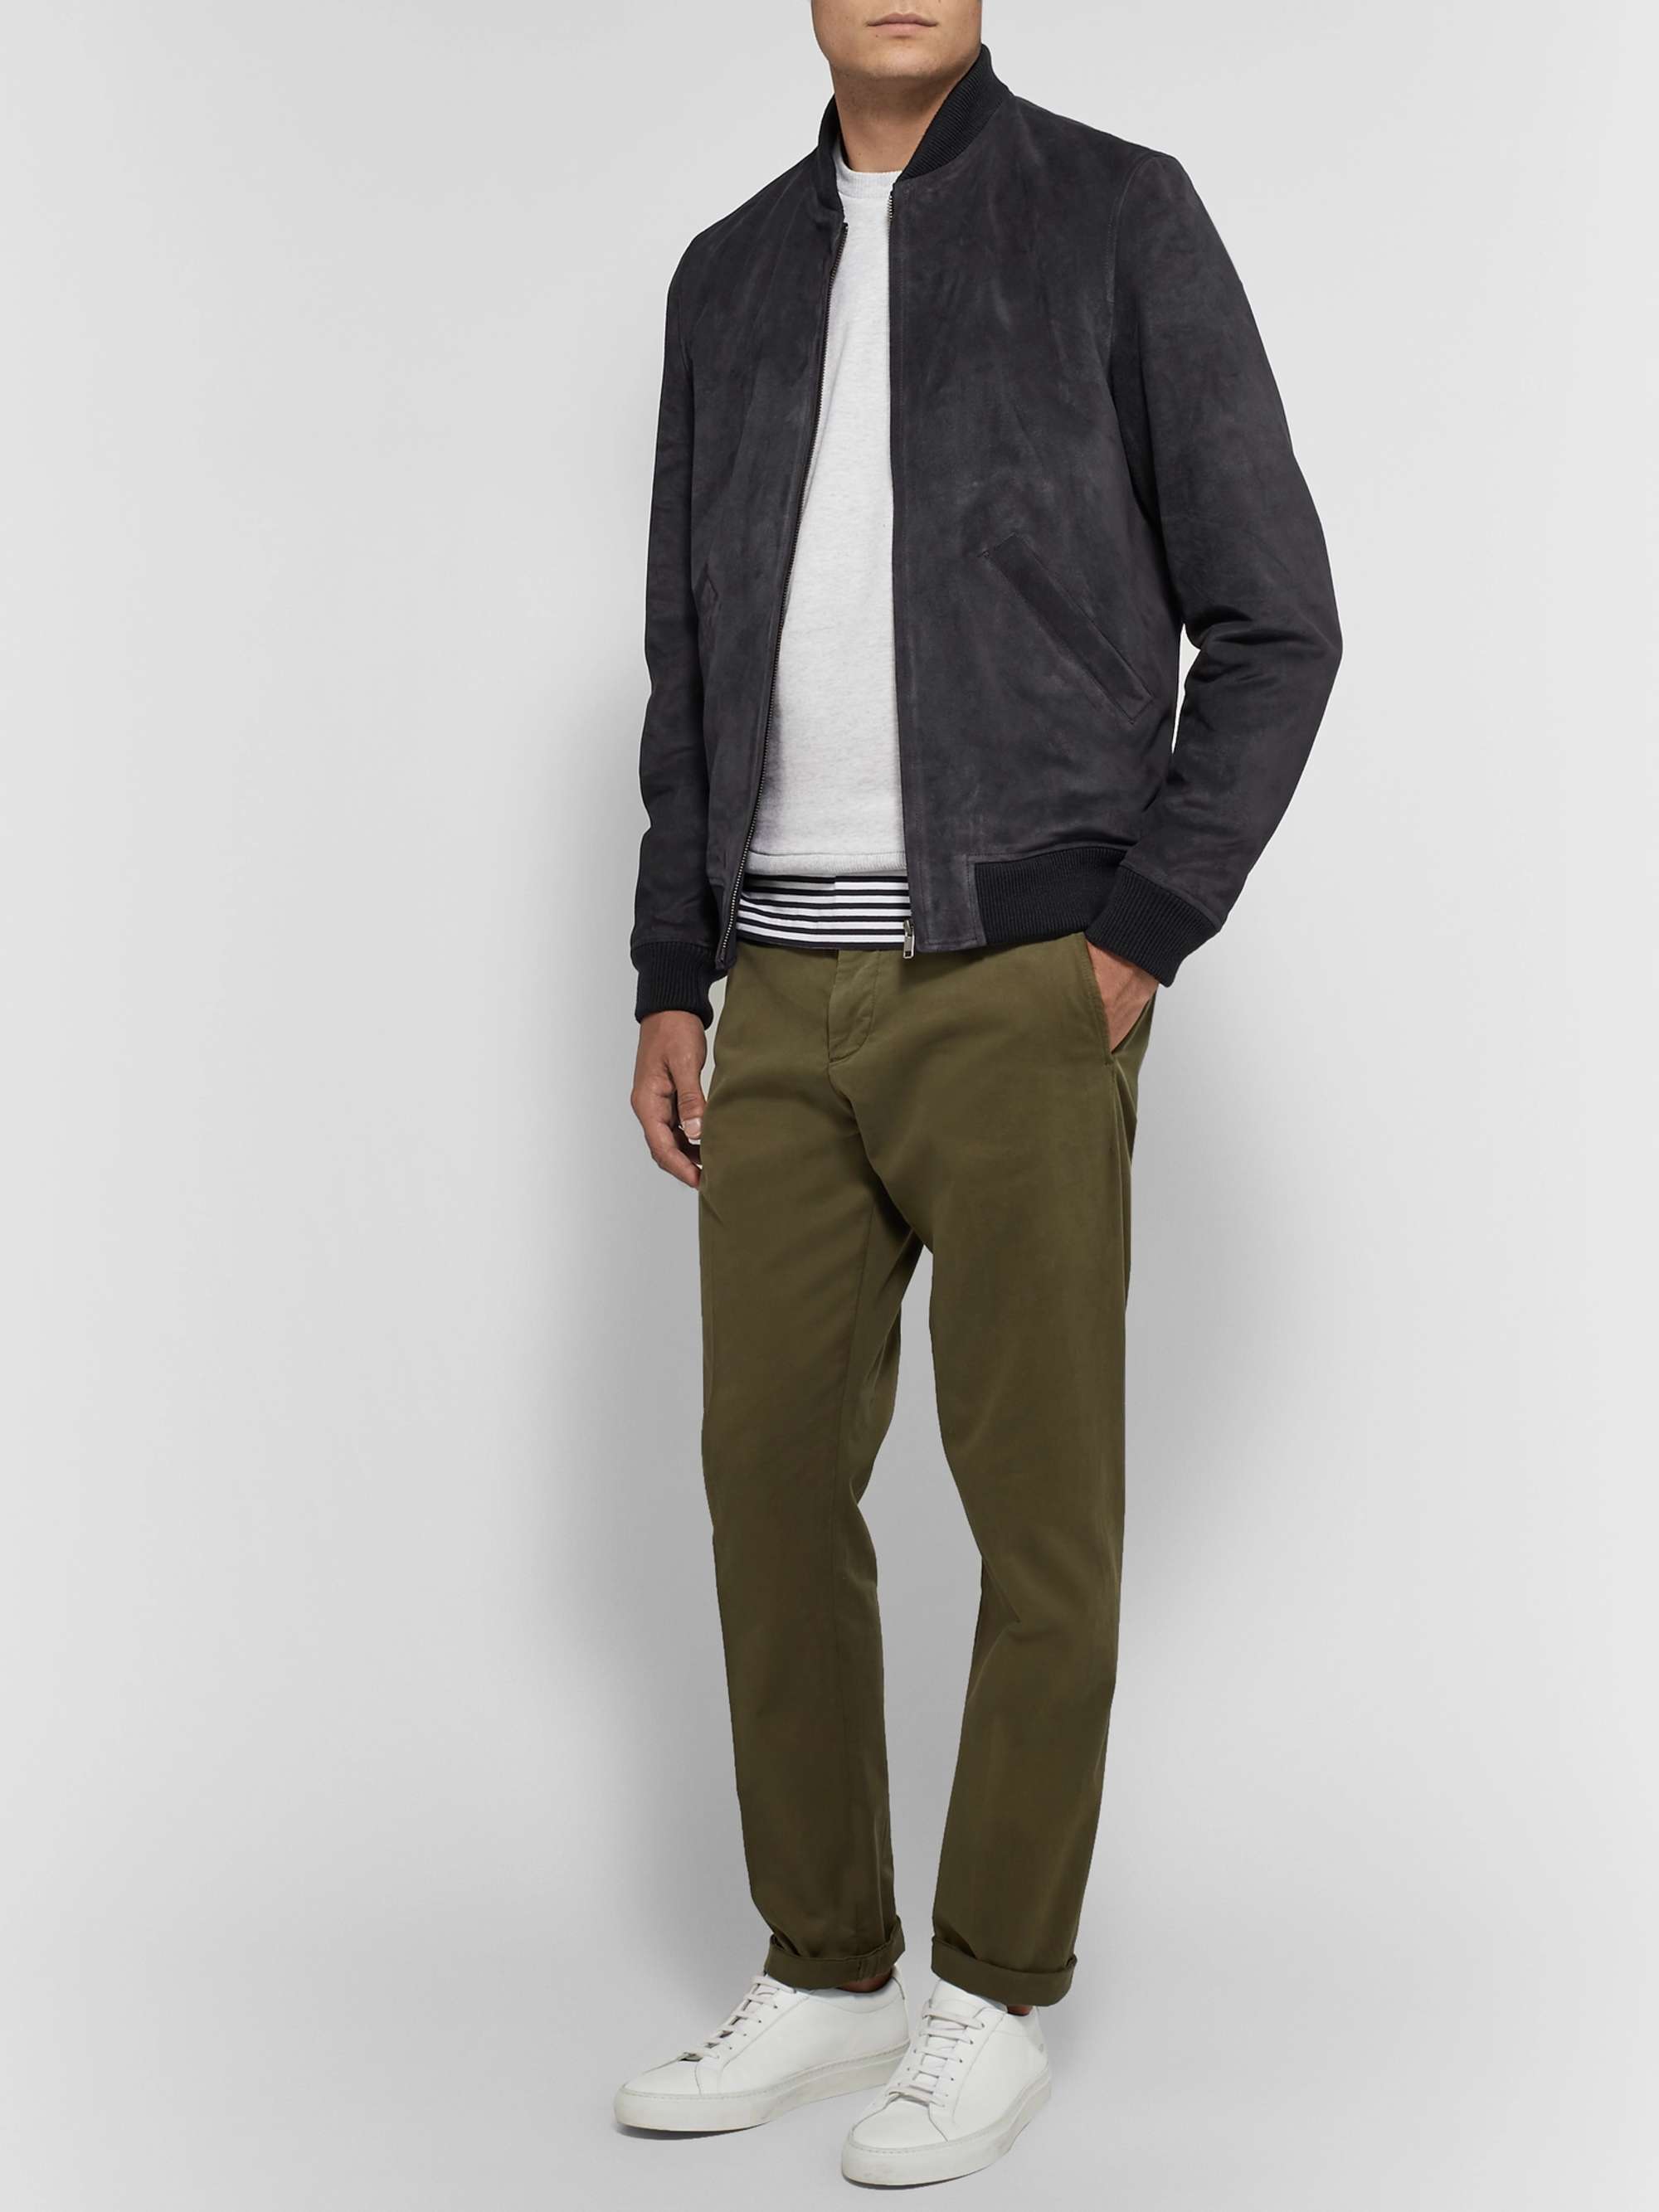 A.P.C. + Louis W The Ferris Suede Bomber Jacket